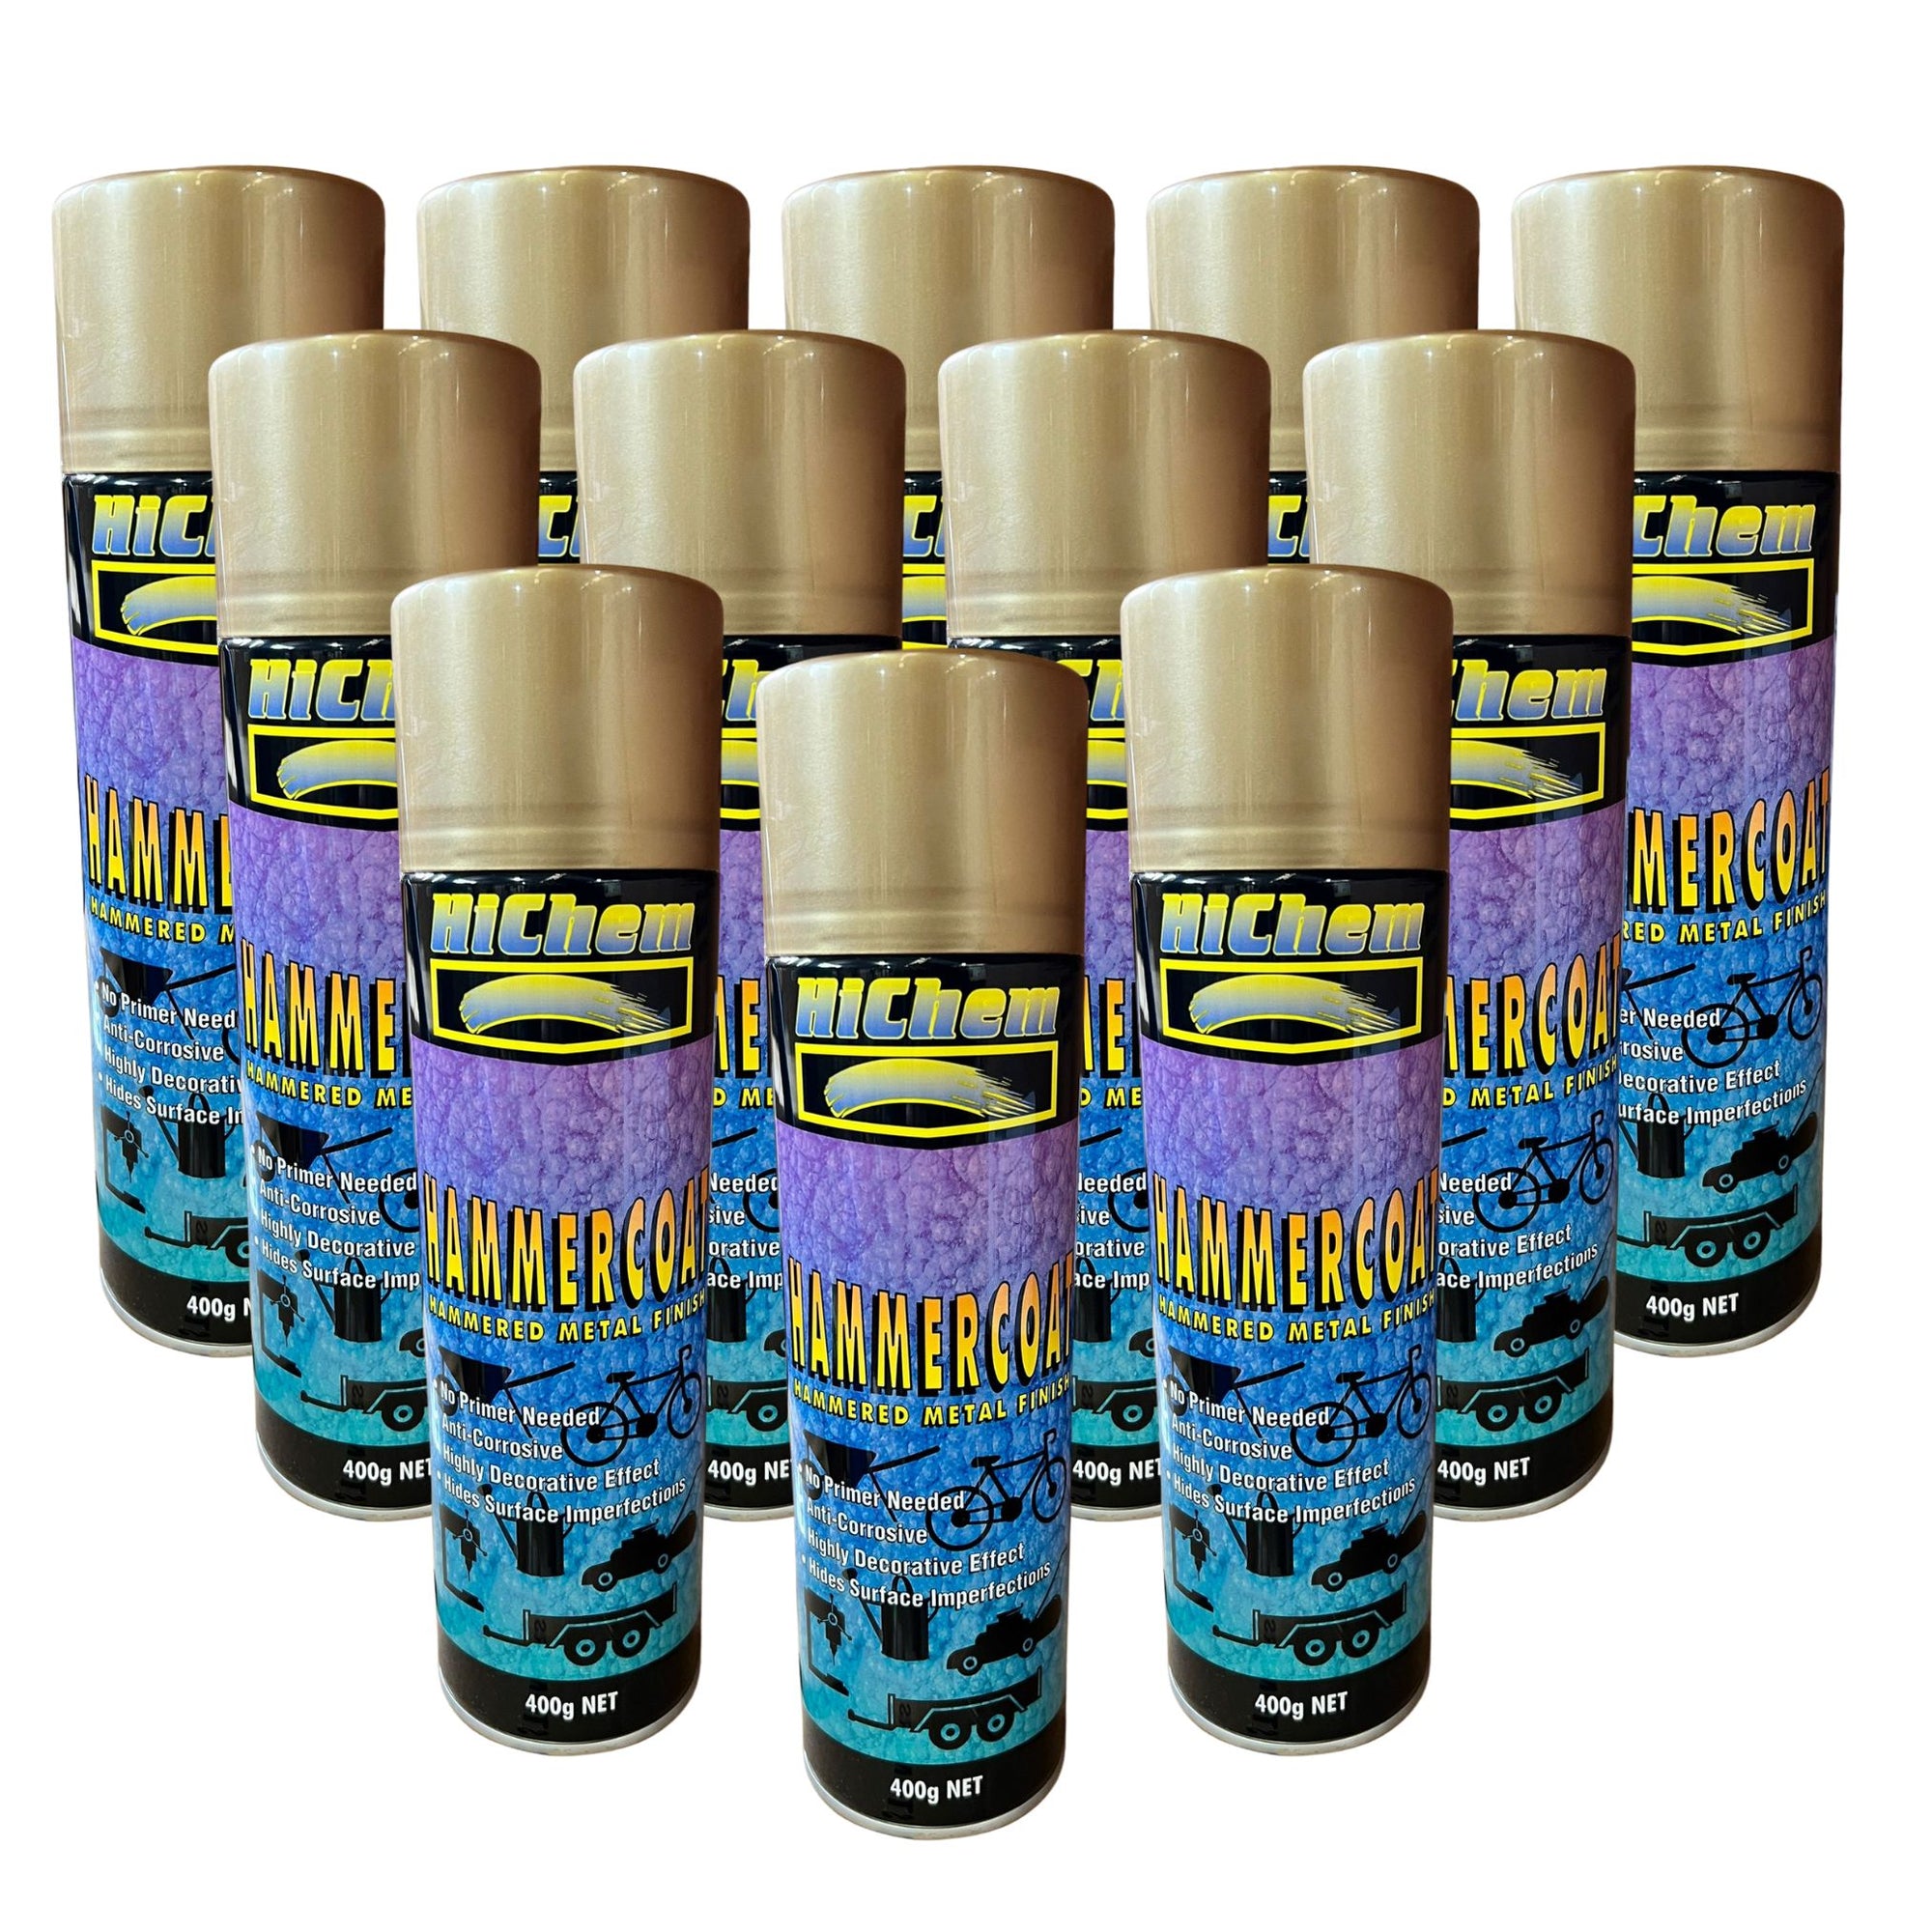 Hammercoat Hammered Gold Spray Paint400g HiChem Decorative Effect Tough 12 Pack - South East Clearance Centre